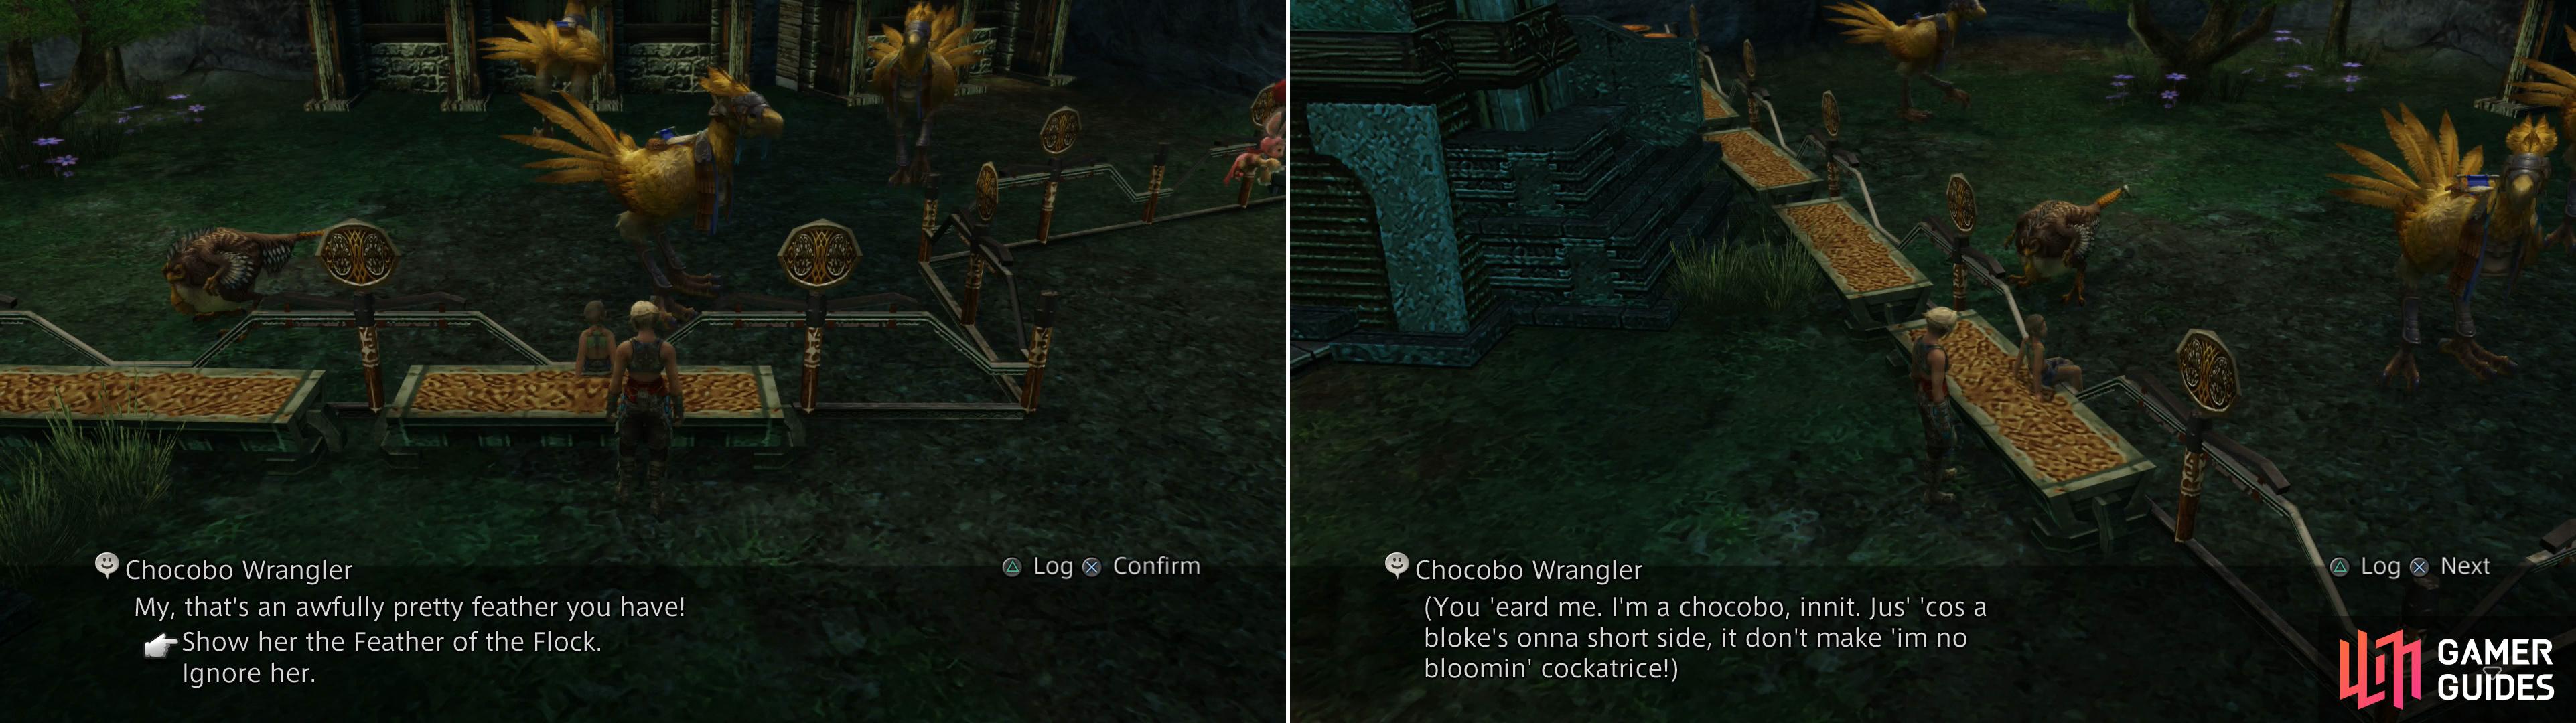 Show the Chocobo Wrangler the Feather of the Flock (left) after which you’ll overhear a rather odd “Chocobo” (right).